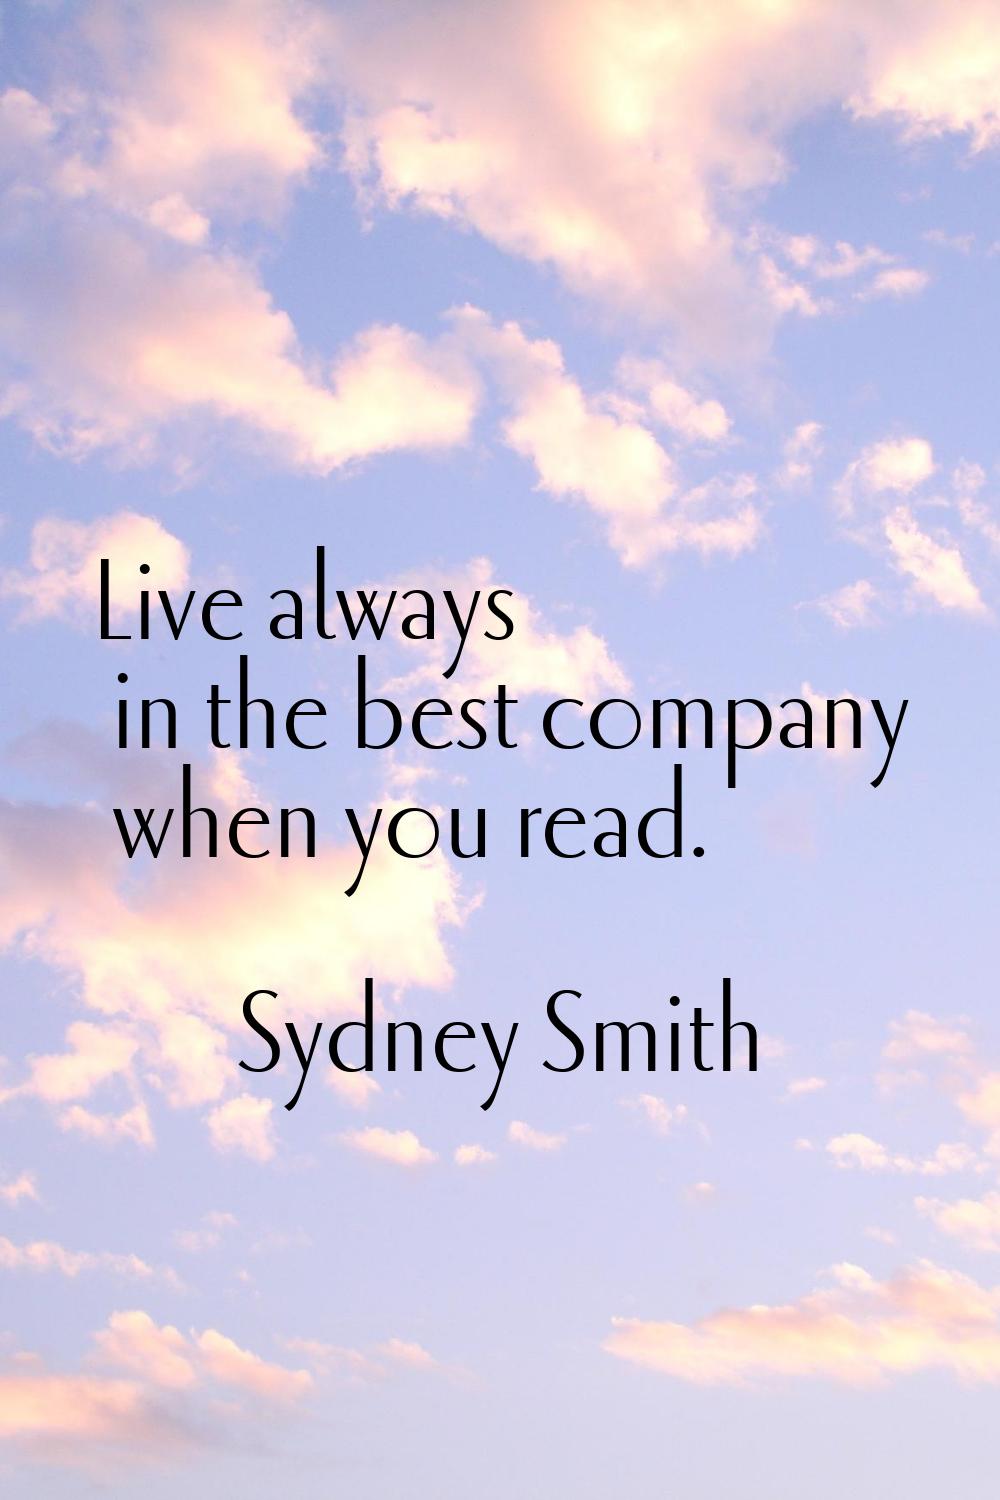 Live always in the best company when you read.